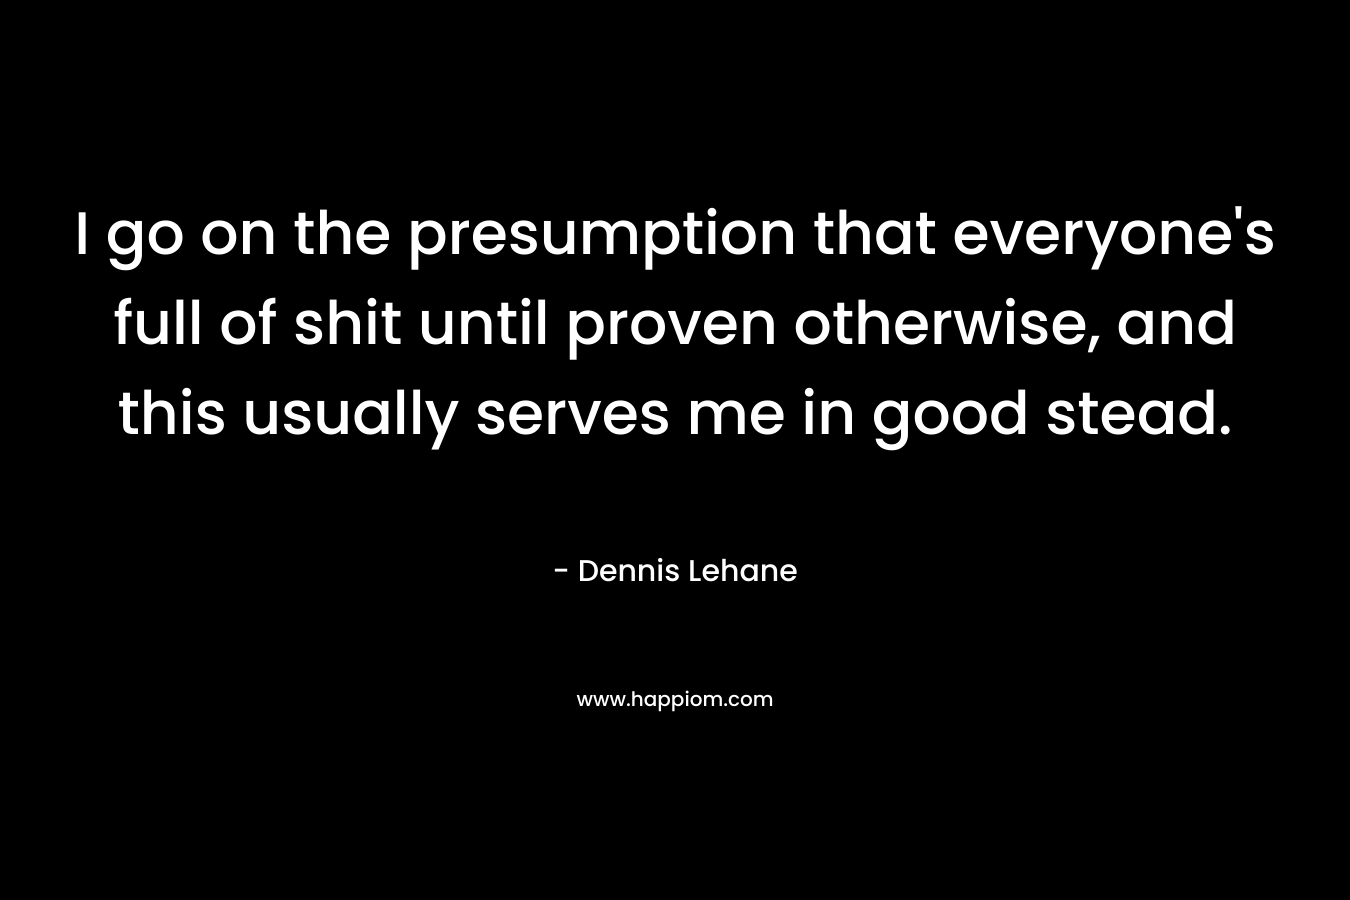 I go on the presumption that everyone’s full of shit until proven otherwise, and this usually serves me in good stead. – Dennis Lehane